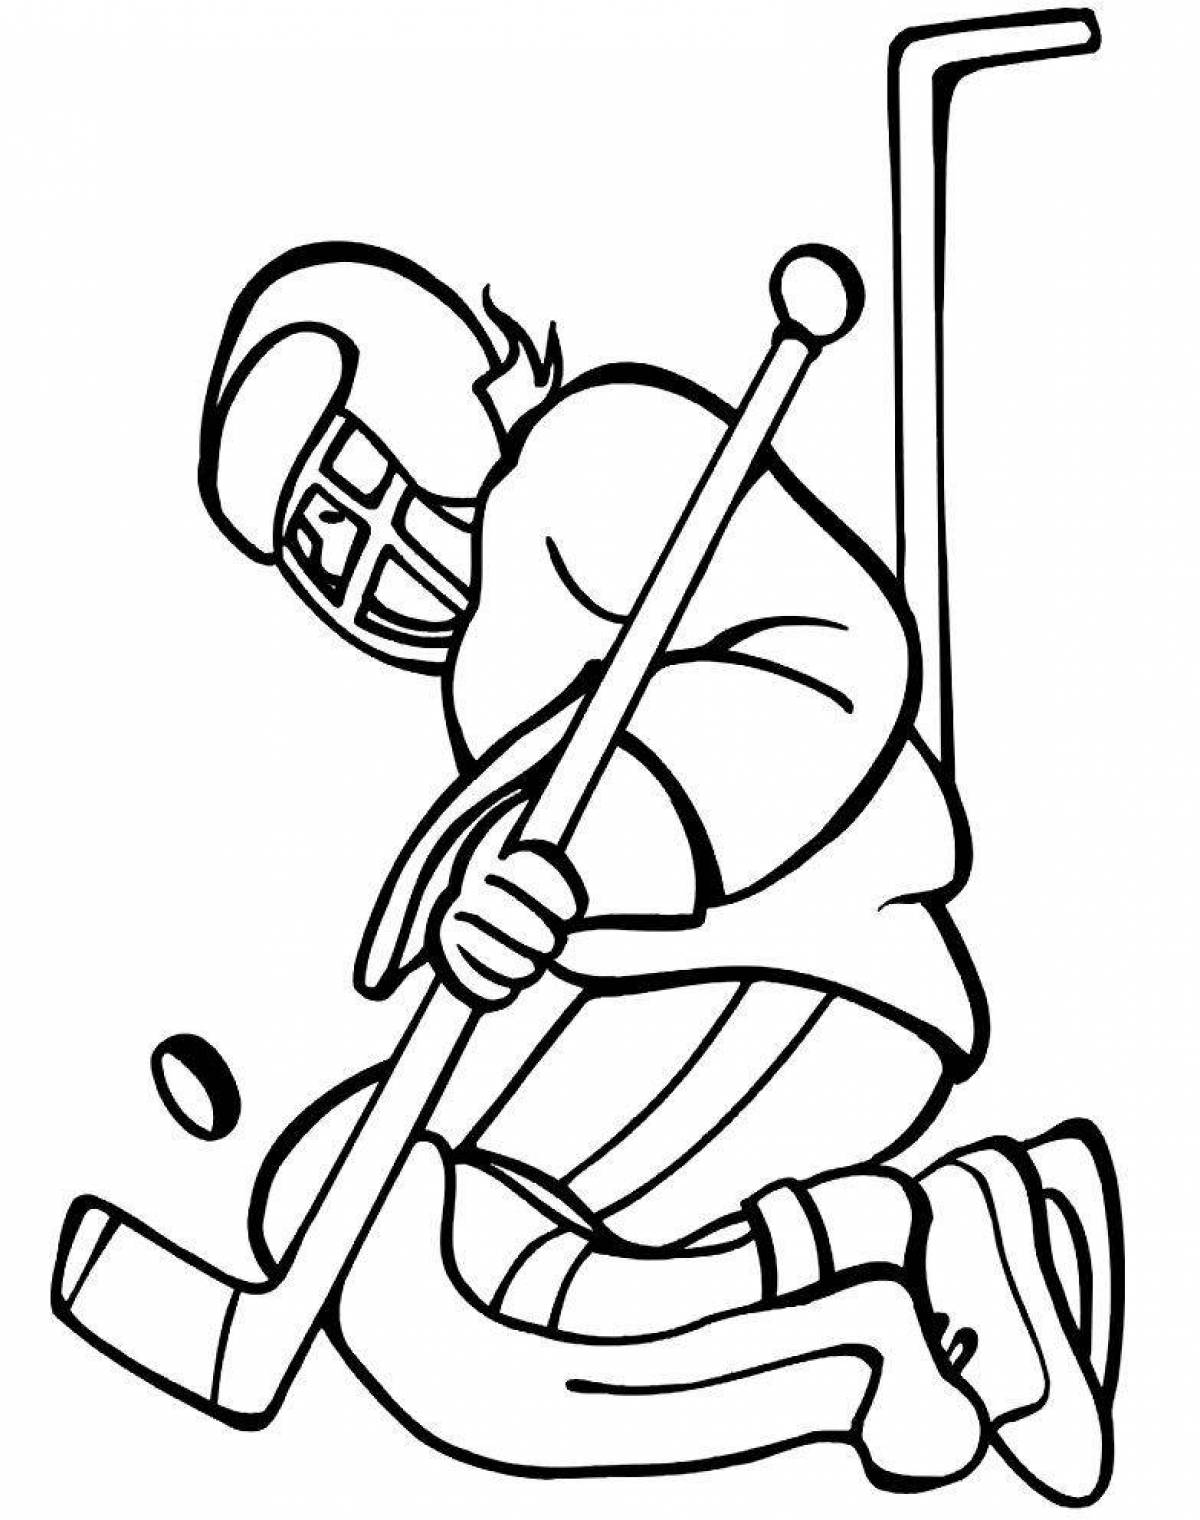 Bright hockey coloring book for kids